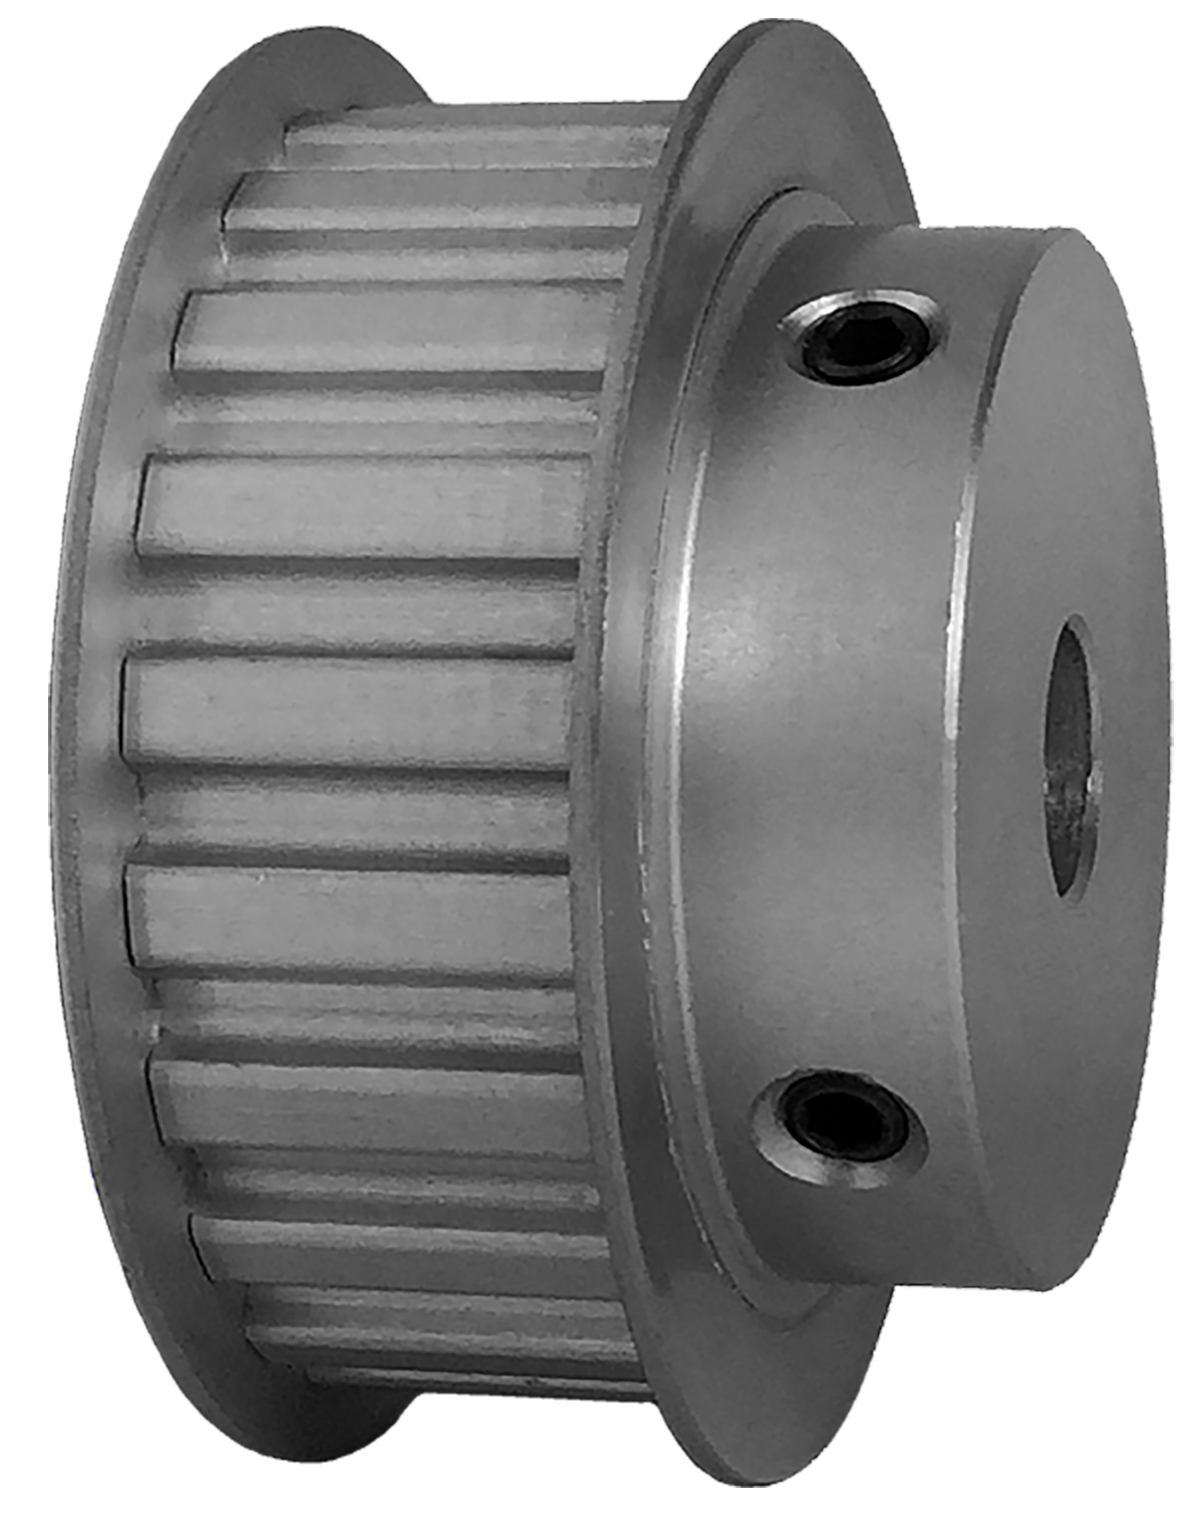 21L075-6FA6 - Aluminum Imperial Pitch Pulleys